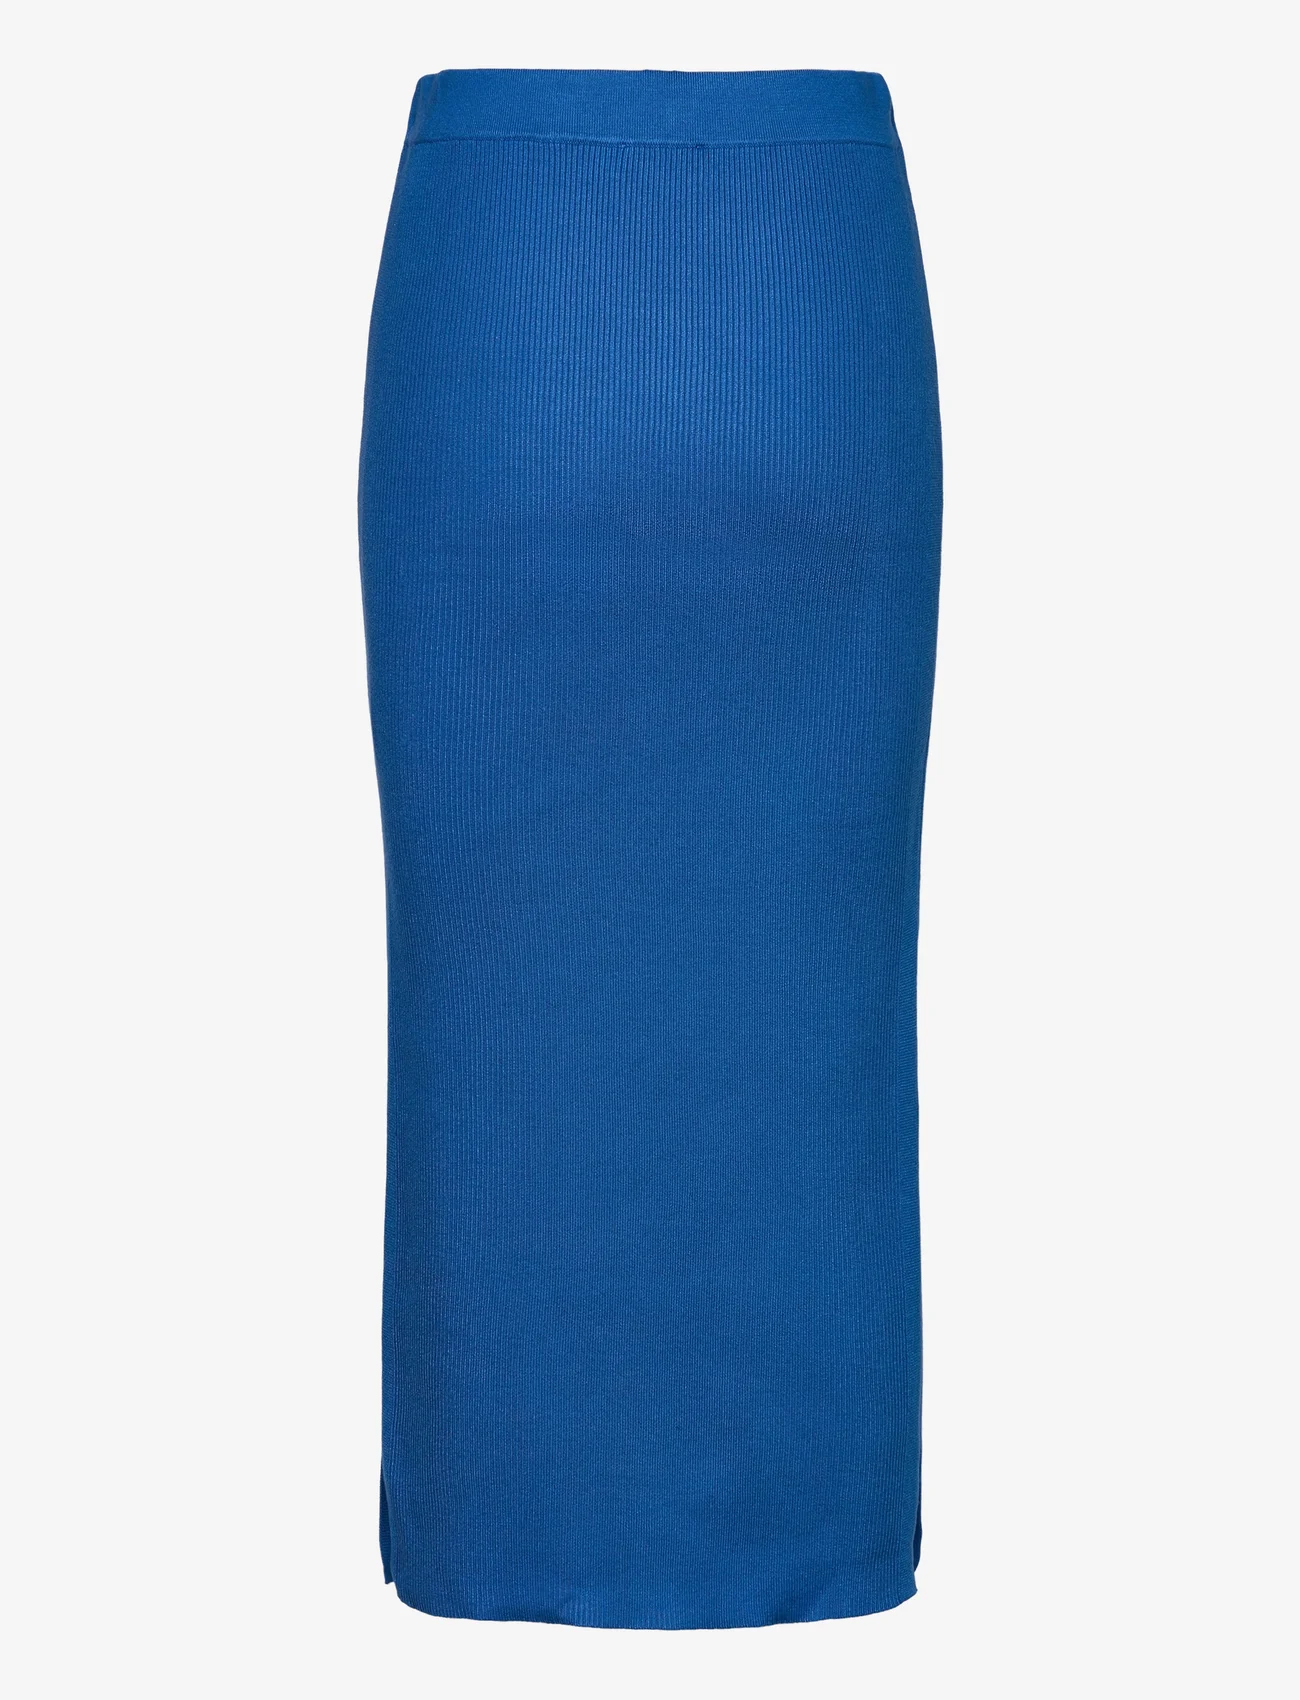 NORR - Sherry knit skirt - knitted skirts - royal blue - 1